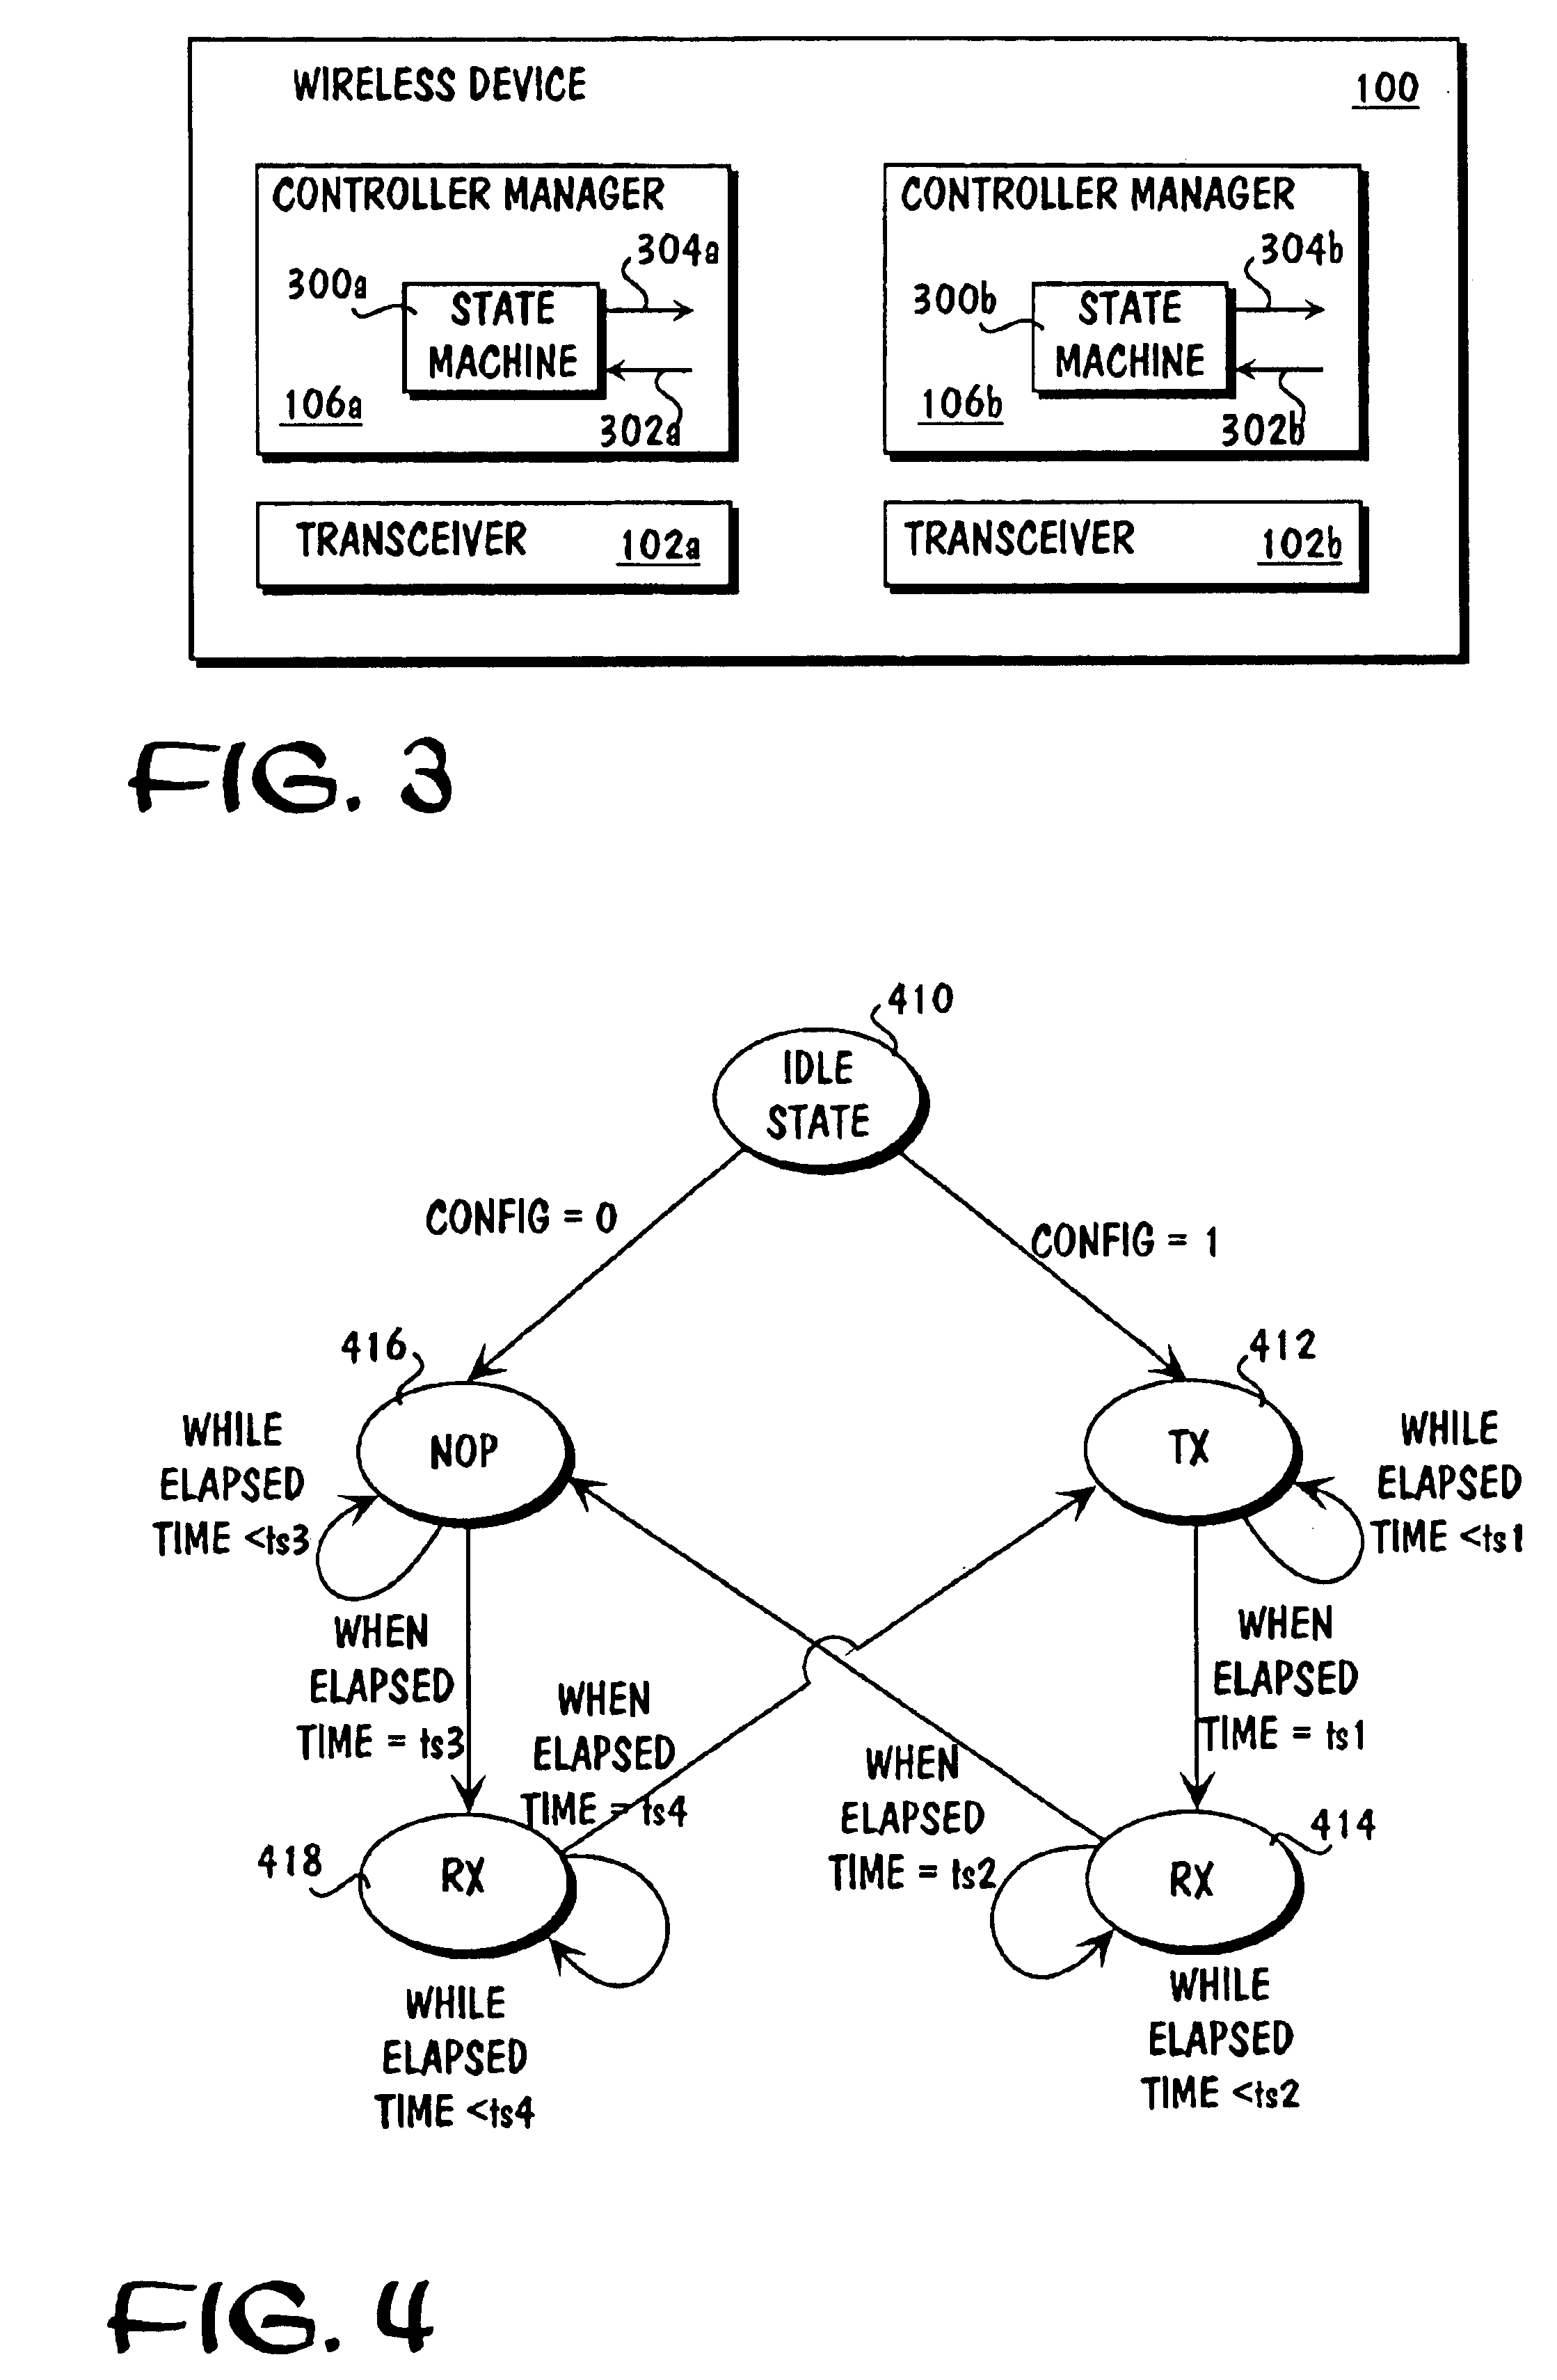 Wireless apparatus having multiple coordinated transceivers for multiple wireless communication protocols